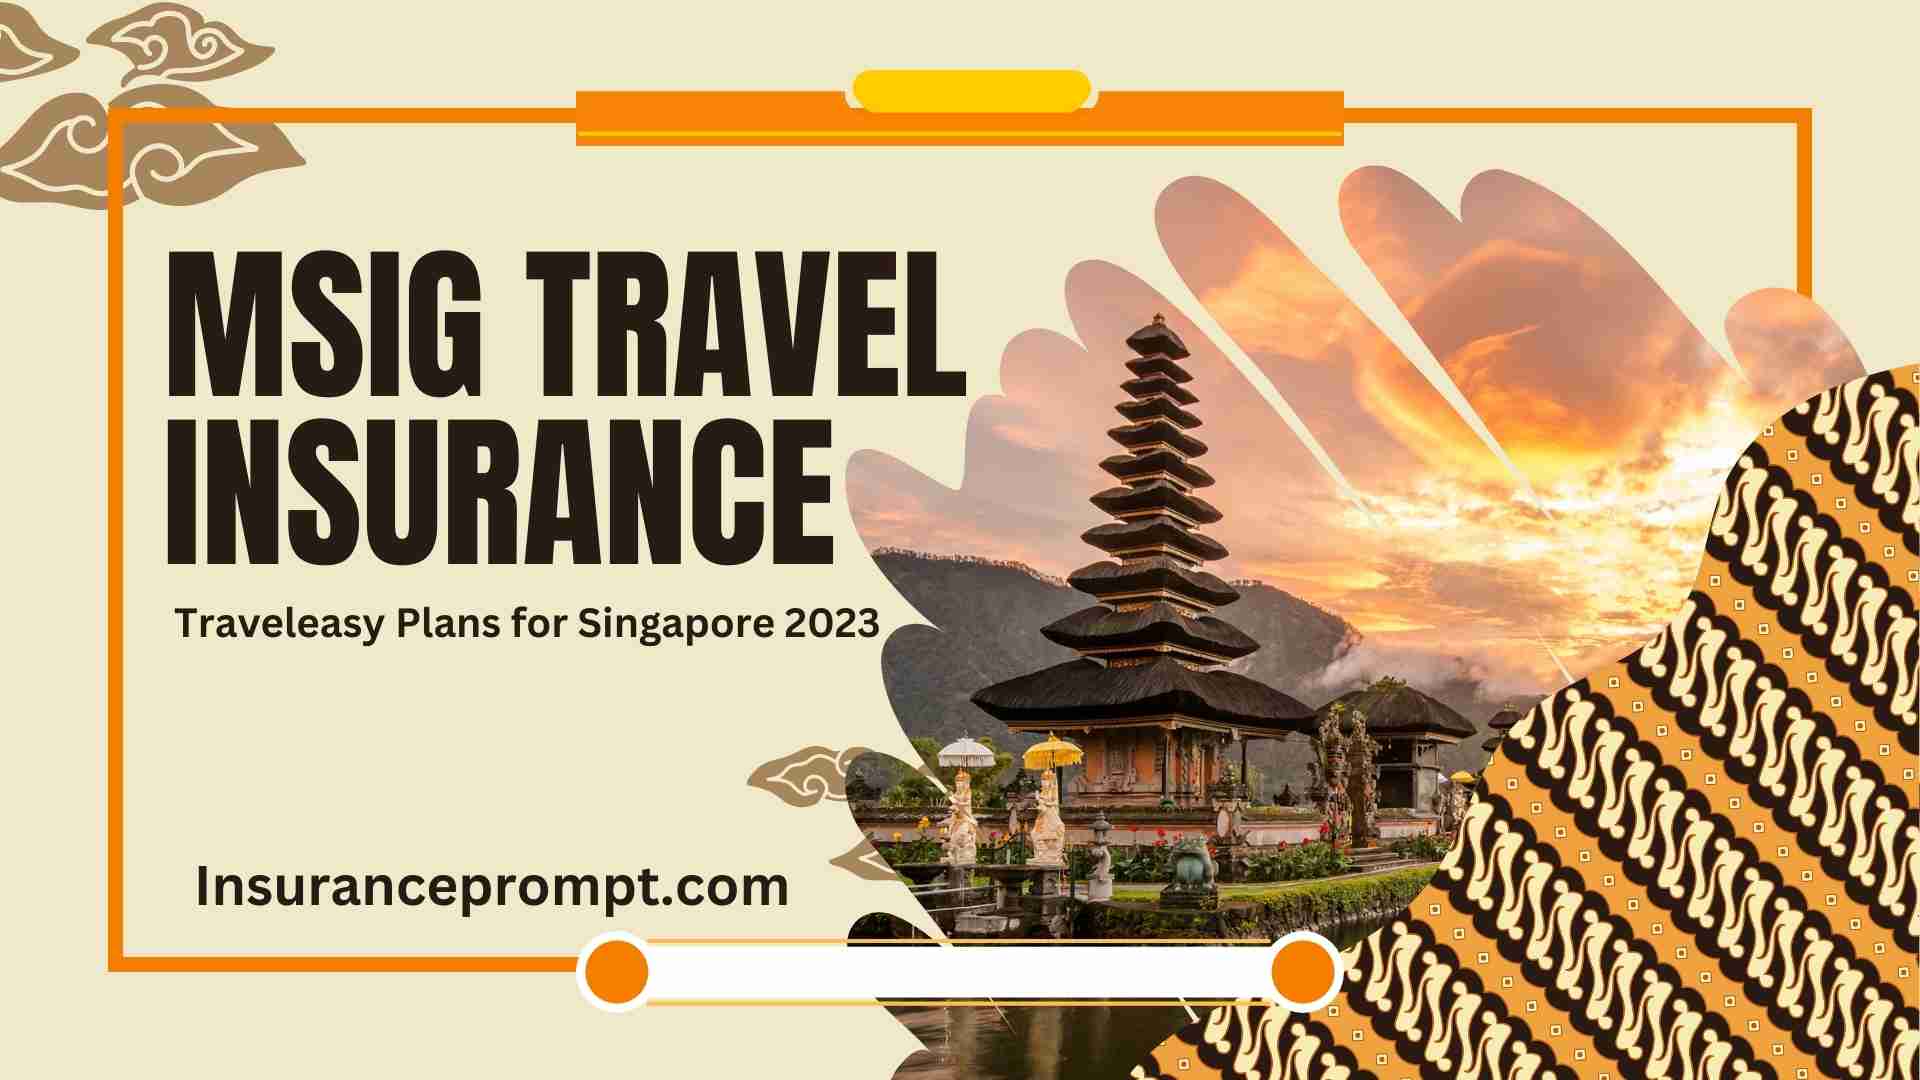 MSIG Travel Insurance Traveleasy Plans for Singapore 2023